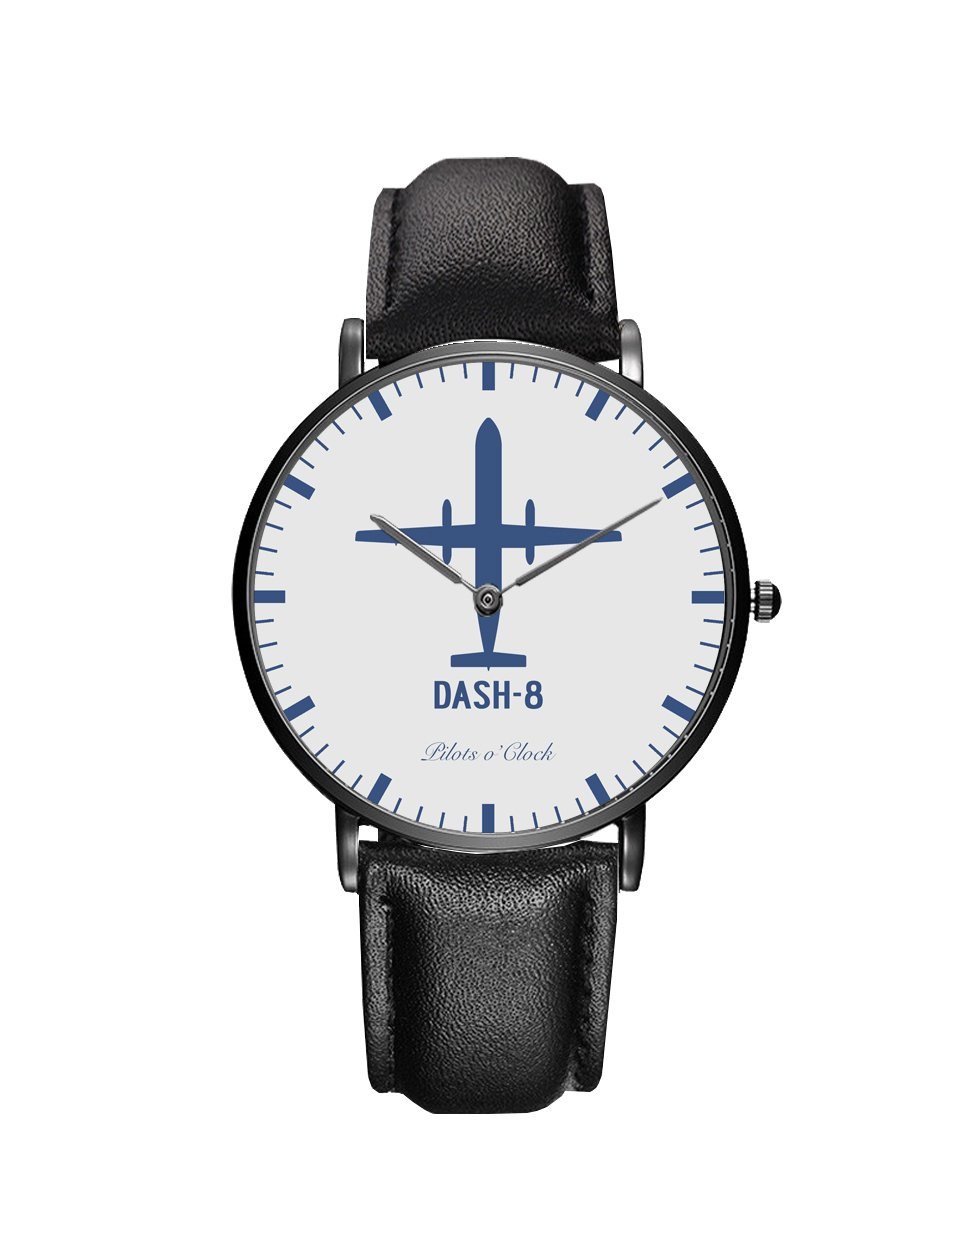 Bombardier Dash-8 Leather Strap Watches Pilot Eyes Store Black & Black Leather Strap 